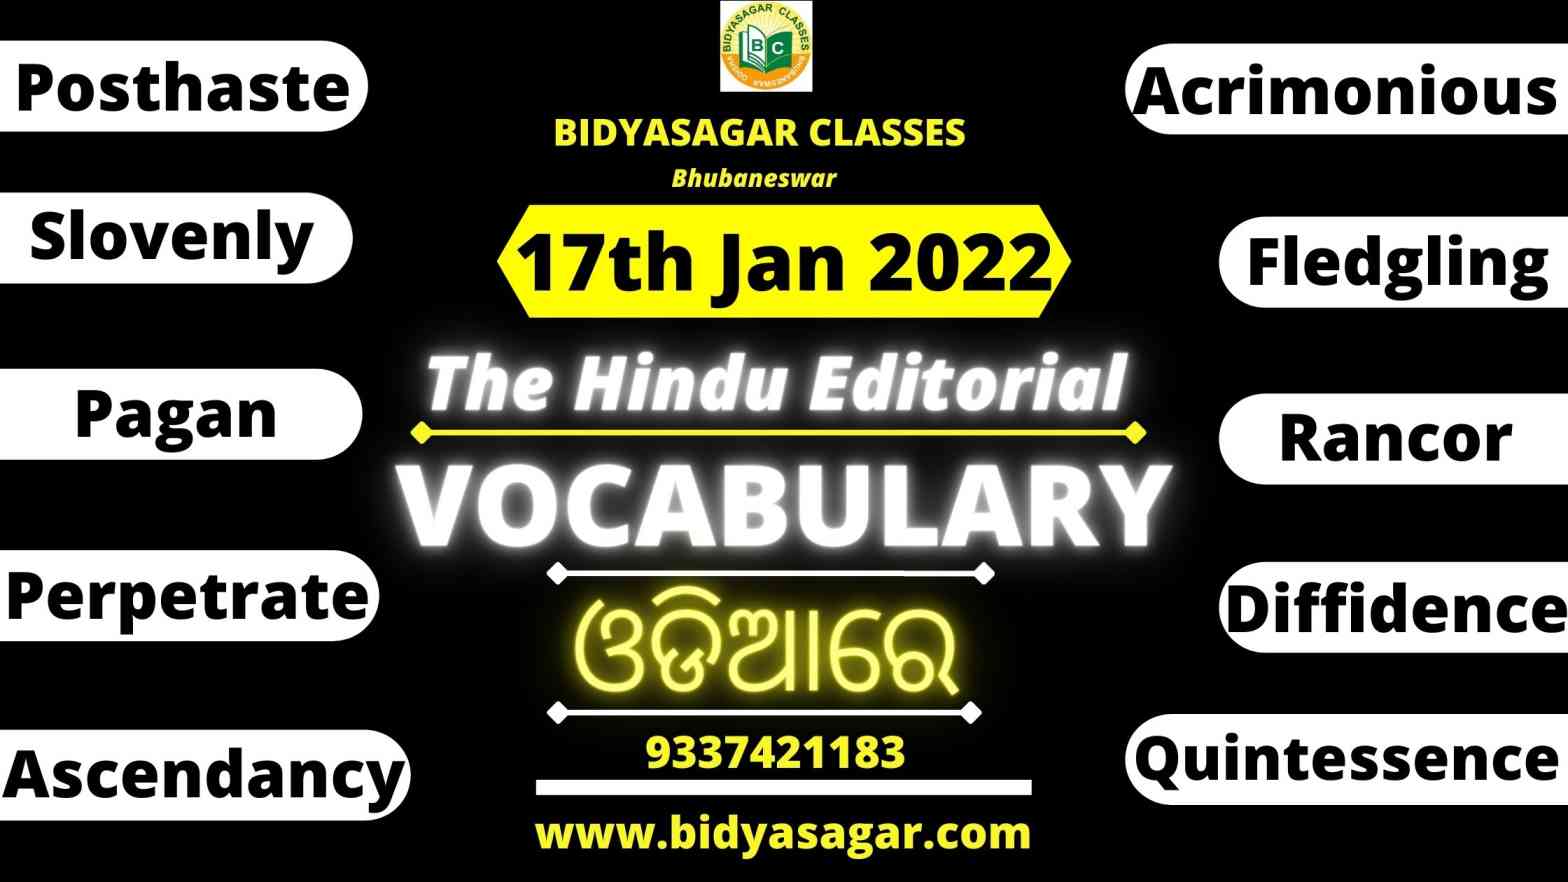 The Hindu Editorial Vocabulary of 17th January 2022